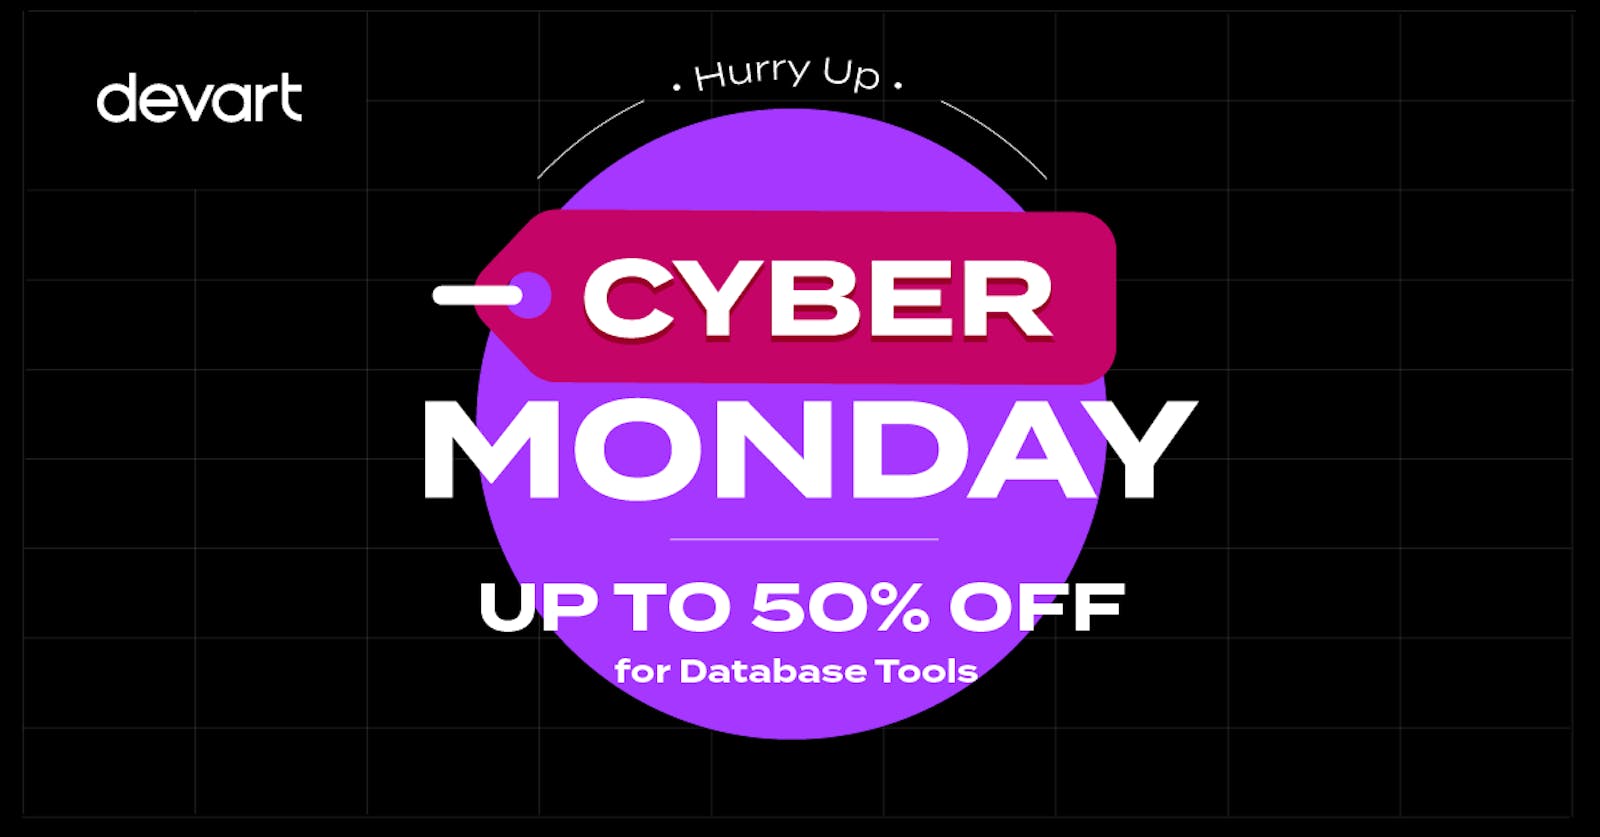 ⚡ Cyber Monday is in full swing! Here's the last chance to save up to 50% on Devart database products!